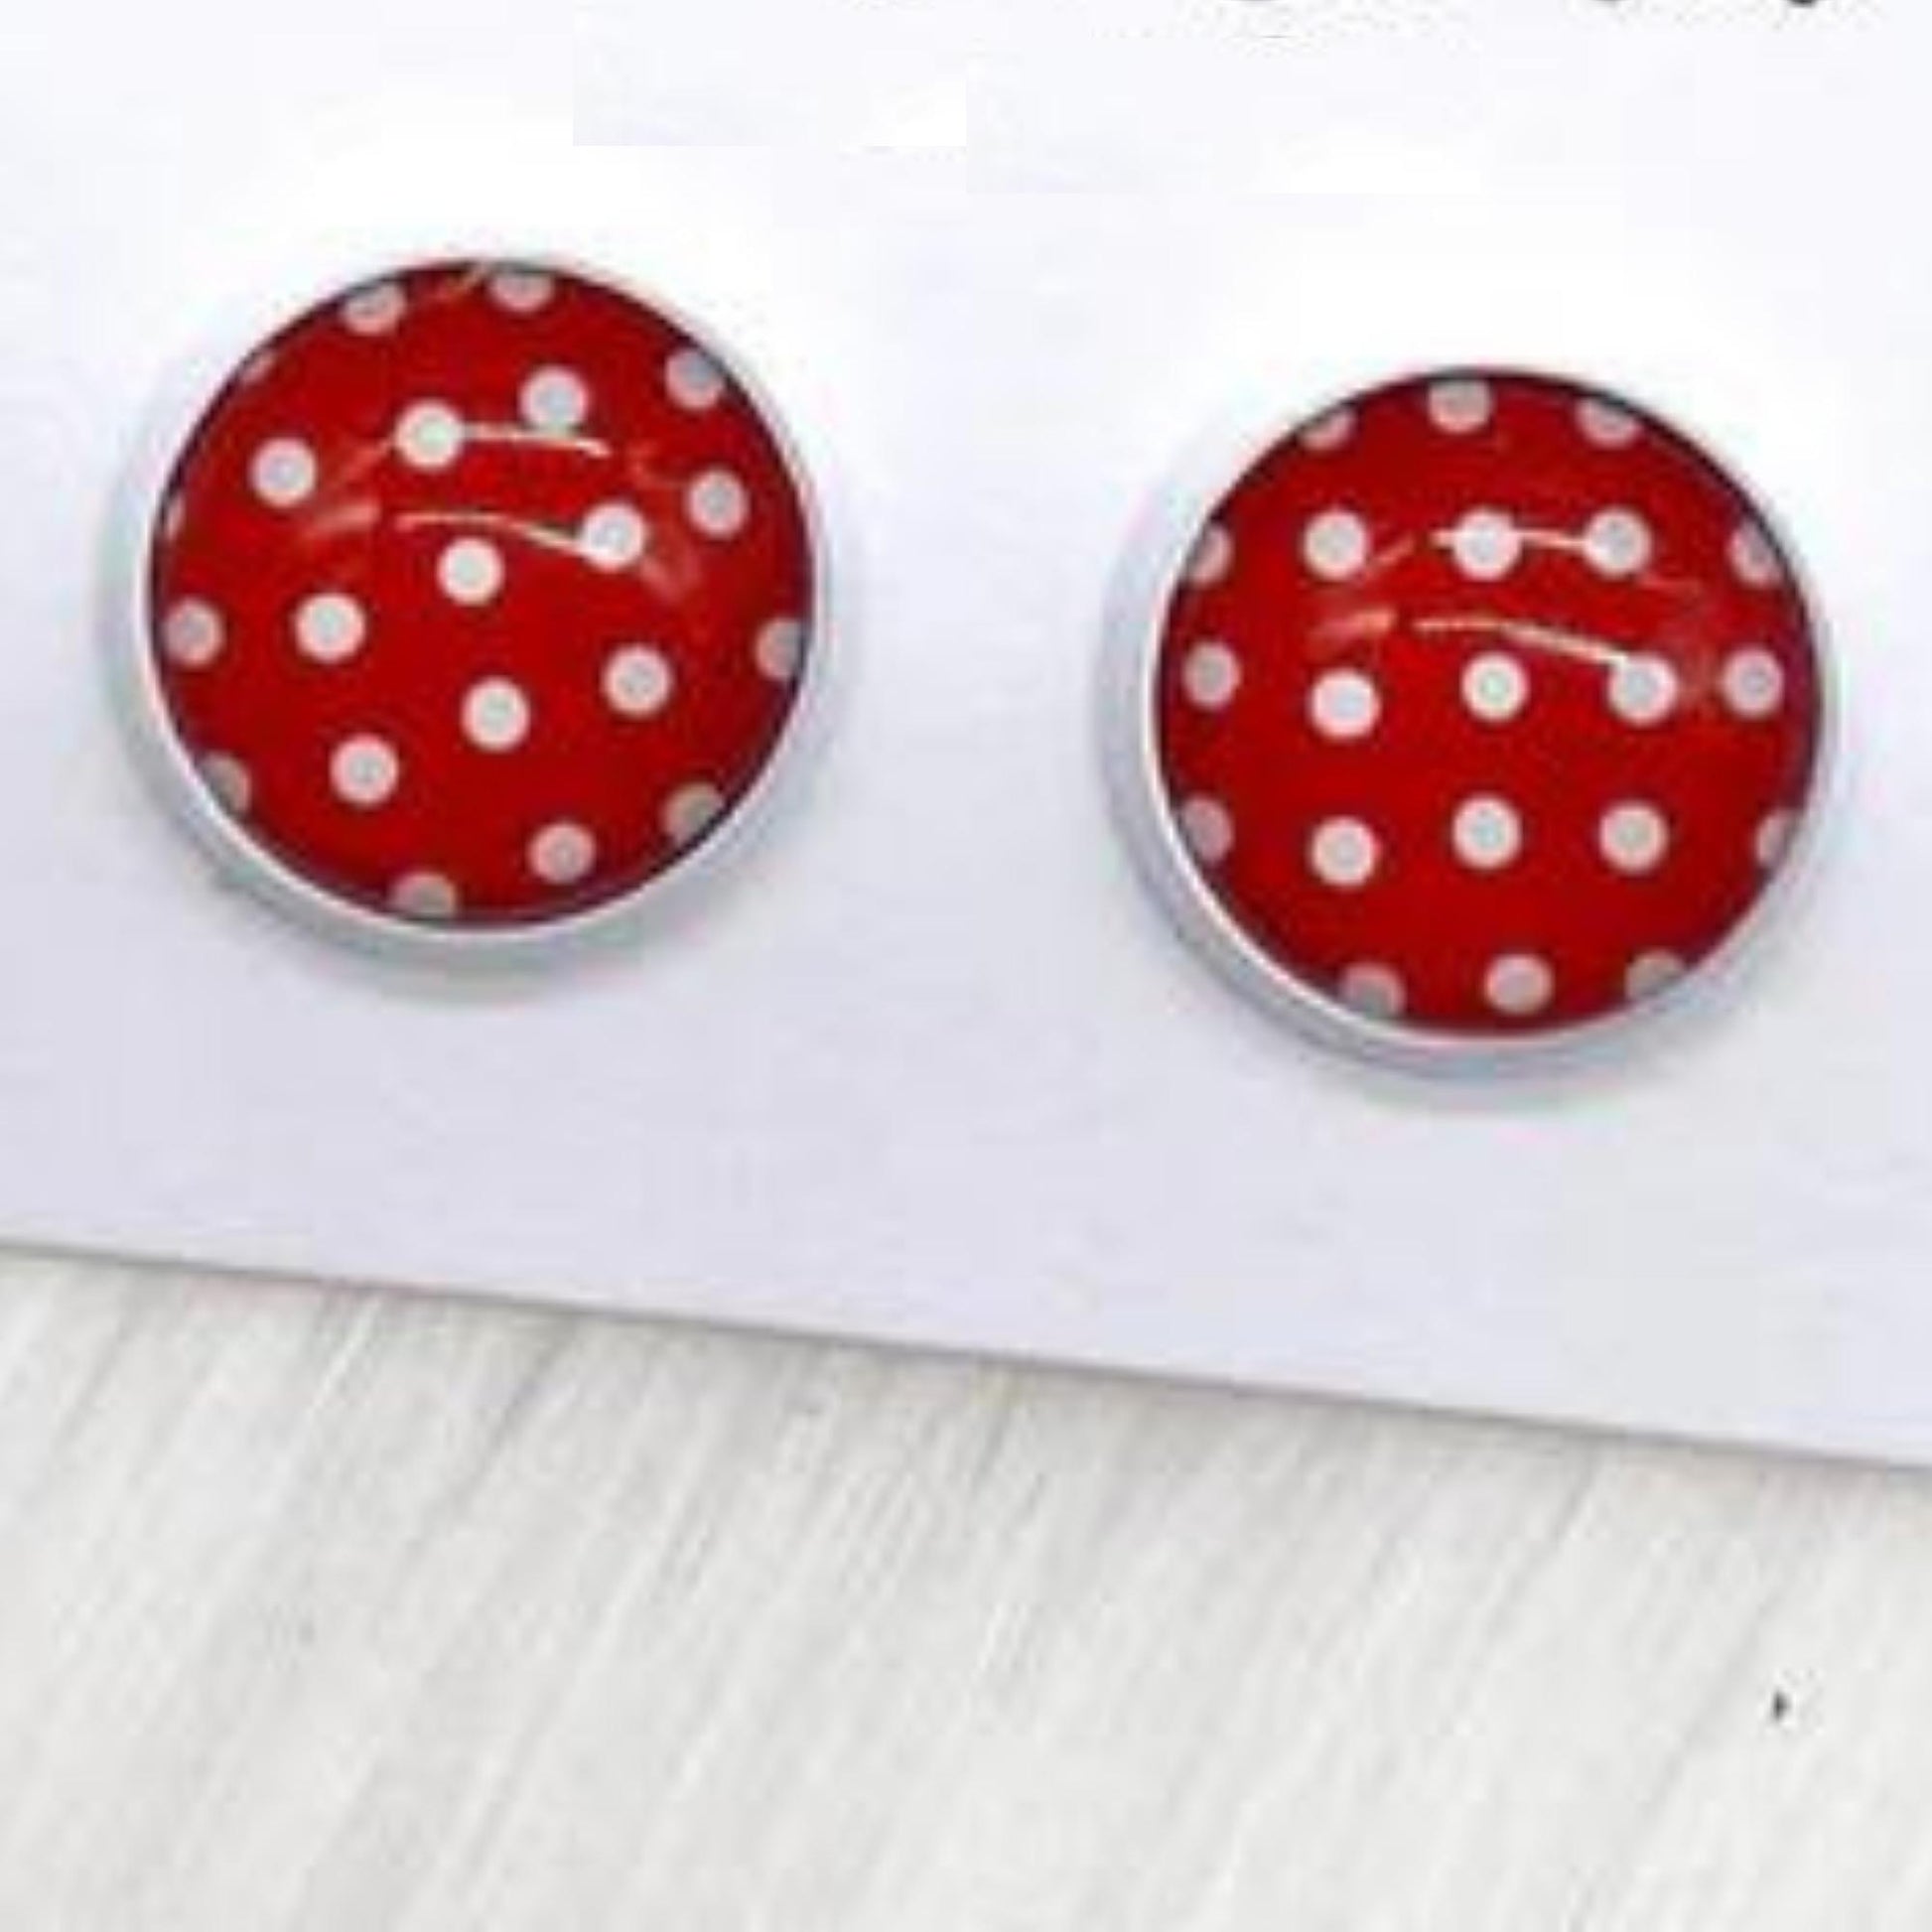 Christmas Earrings - Red with White Polka Dot Retro Style Button Earrings (1 pair) | oak7west.com